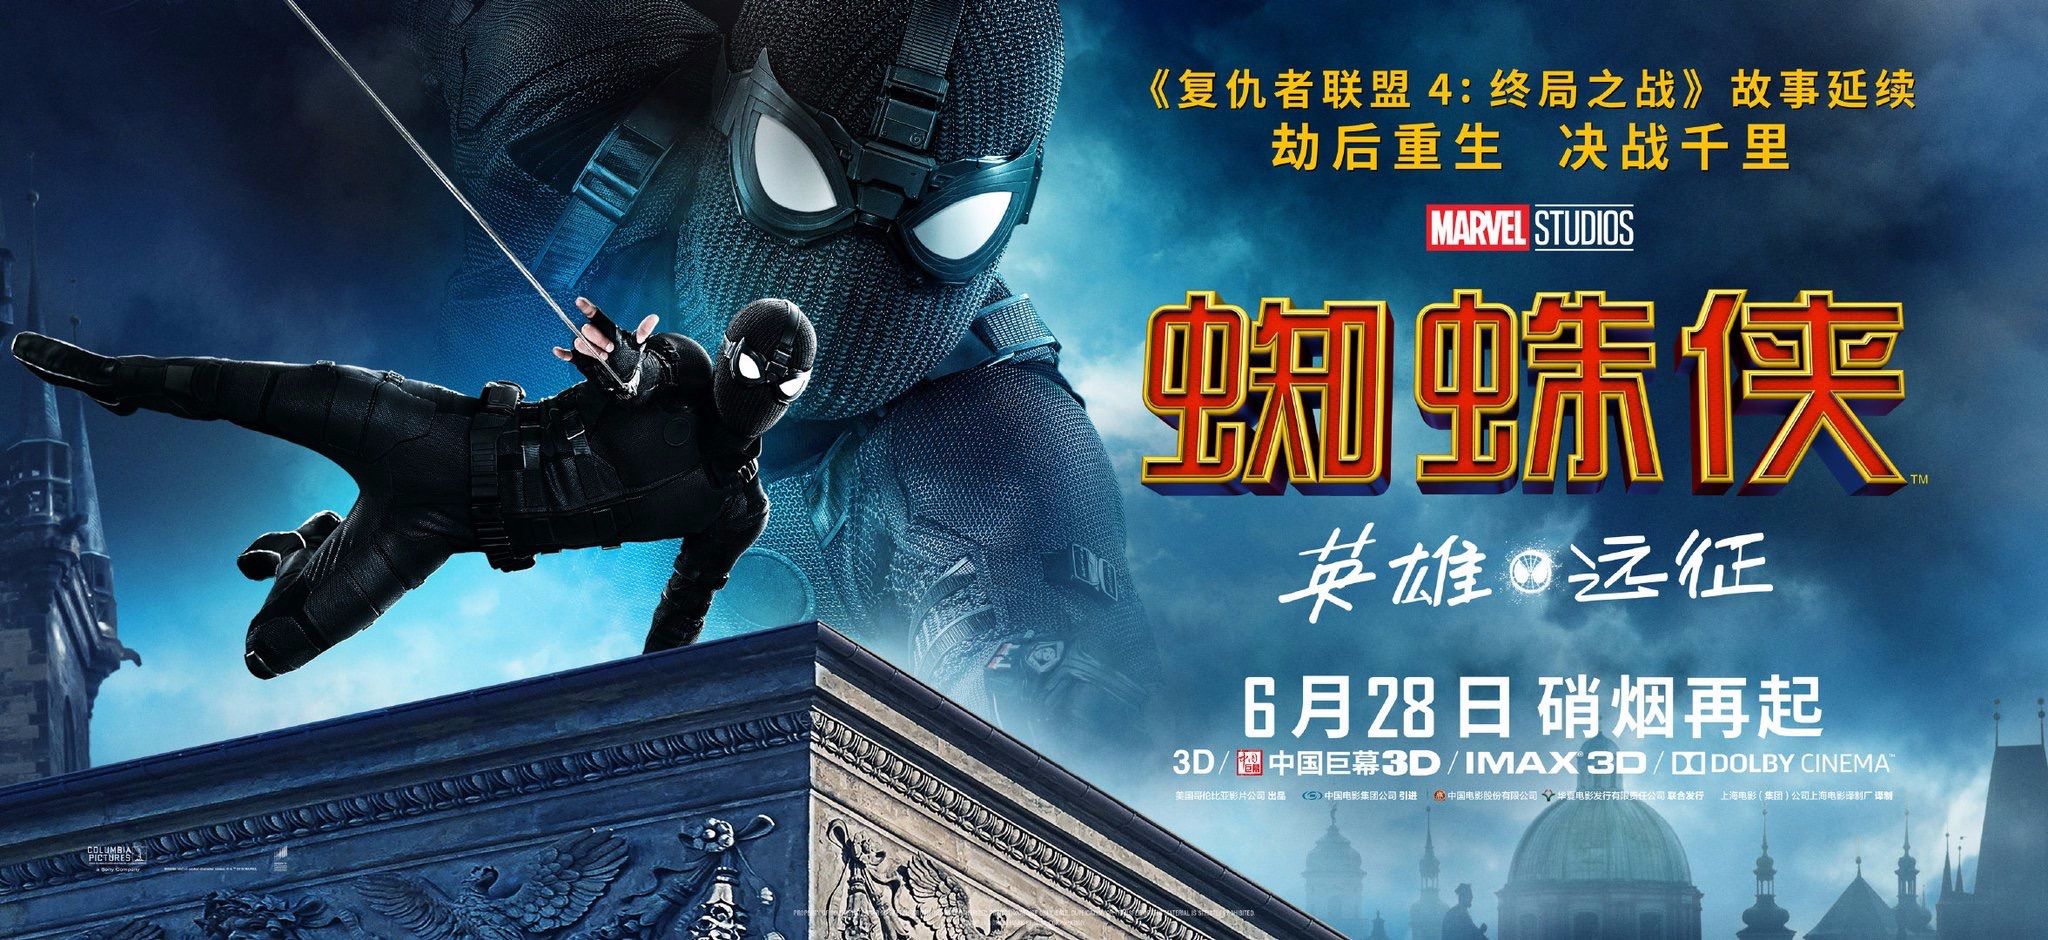 Spider-Man Far from Home Banner #2